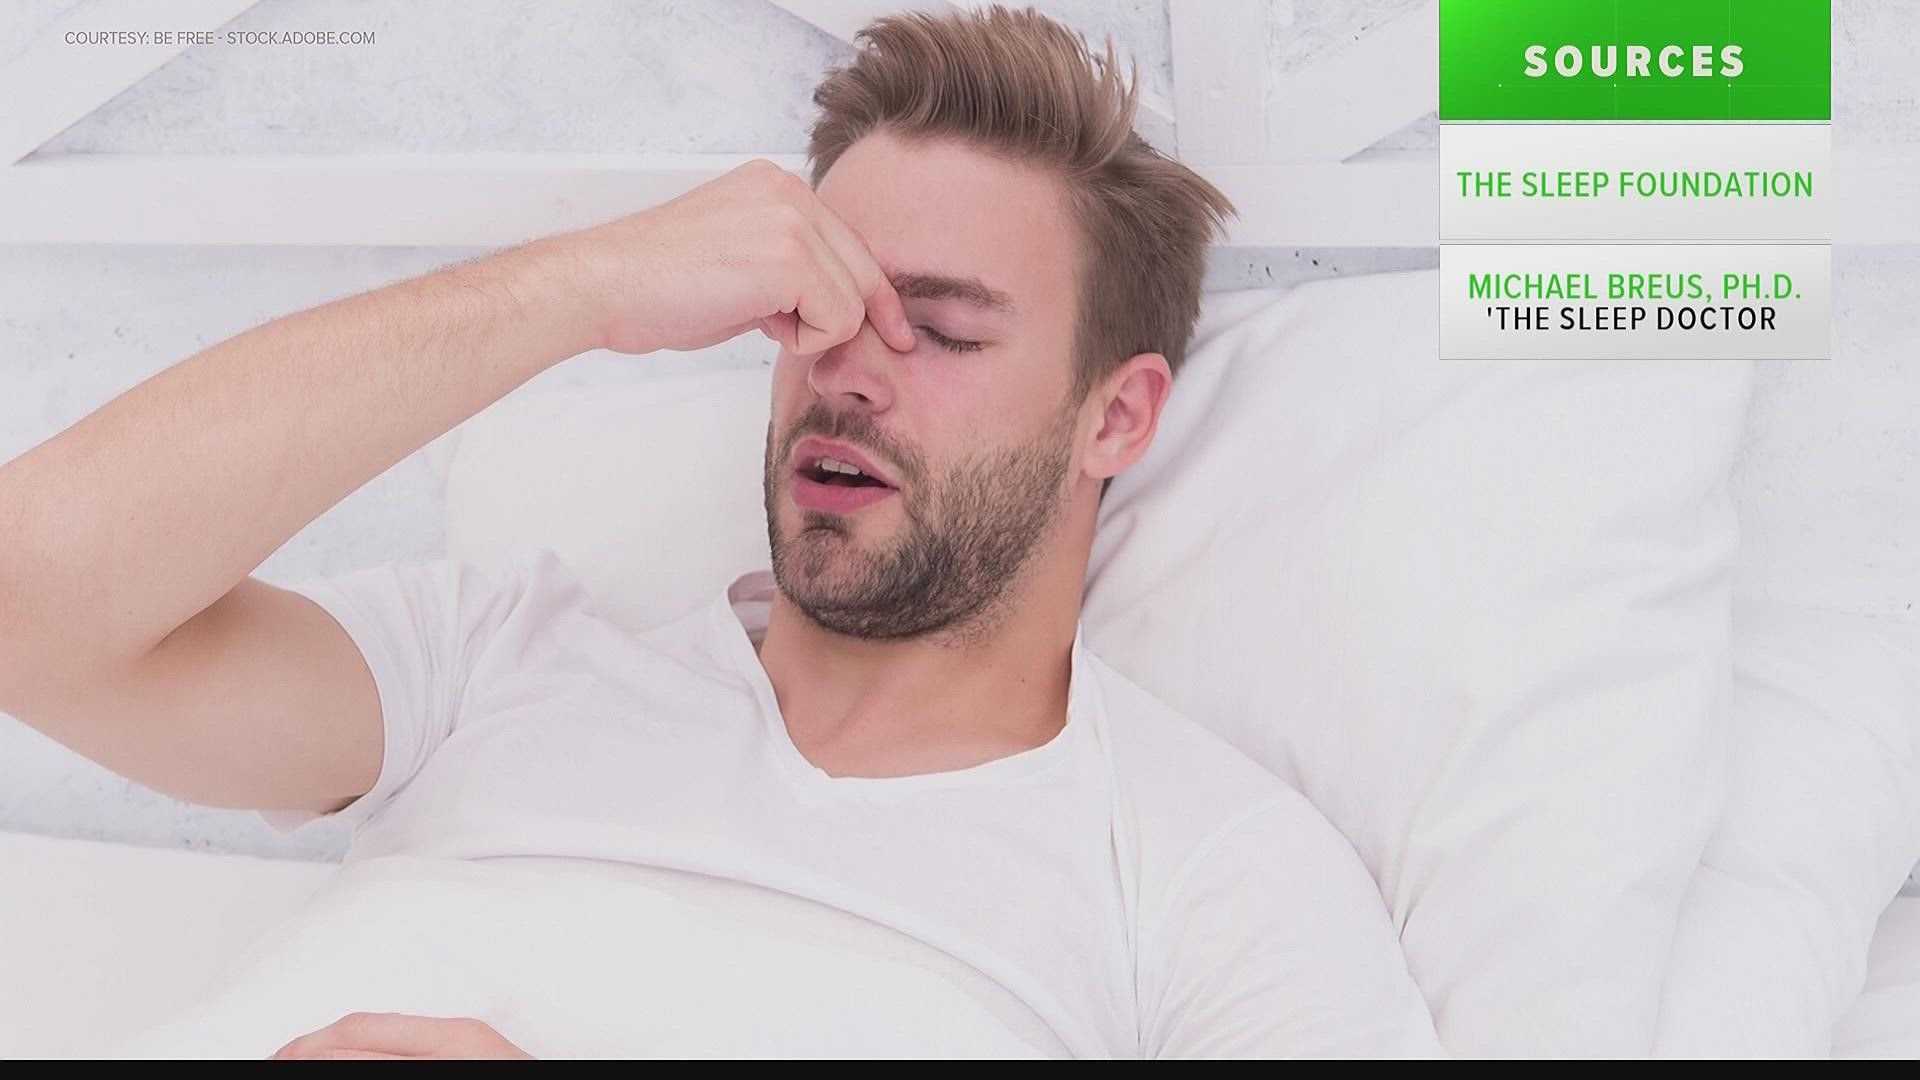 ‘Mouth taping’ at night is a TikTok trend that’s been promoted to provide better sleep, but not everyone should try this, and you shouldn’t just use scotch tape.